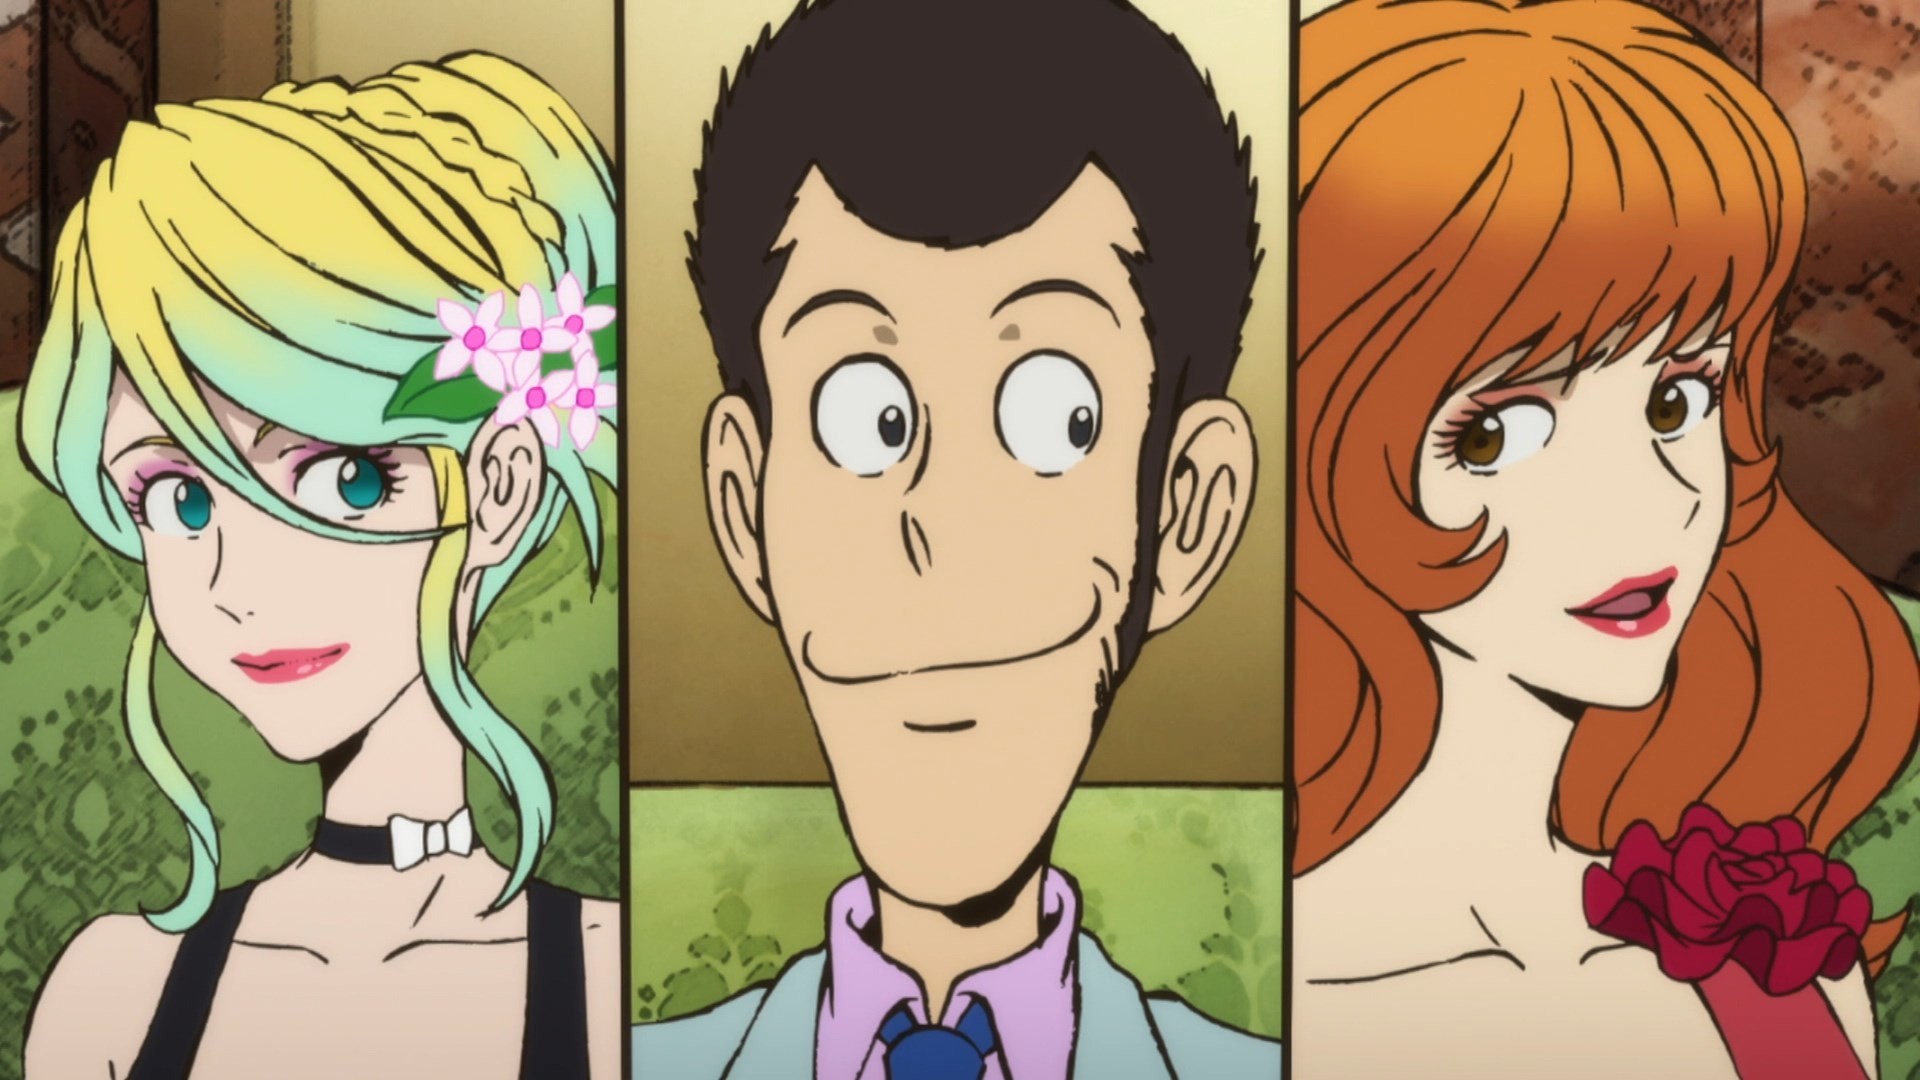 1920x1080   > Lupin The Third Wallpapers Â· Scaricare ... download  ...